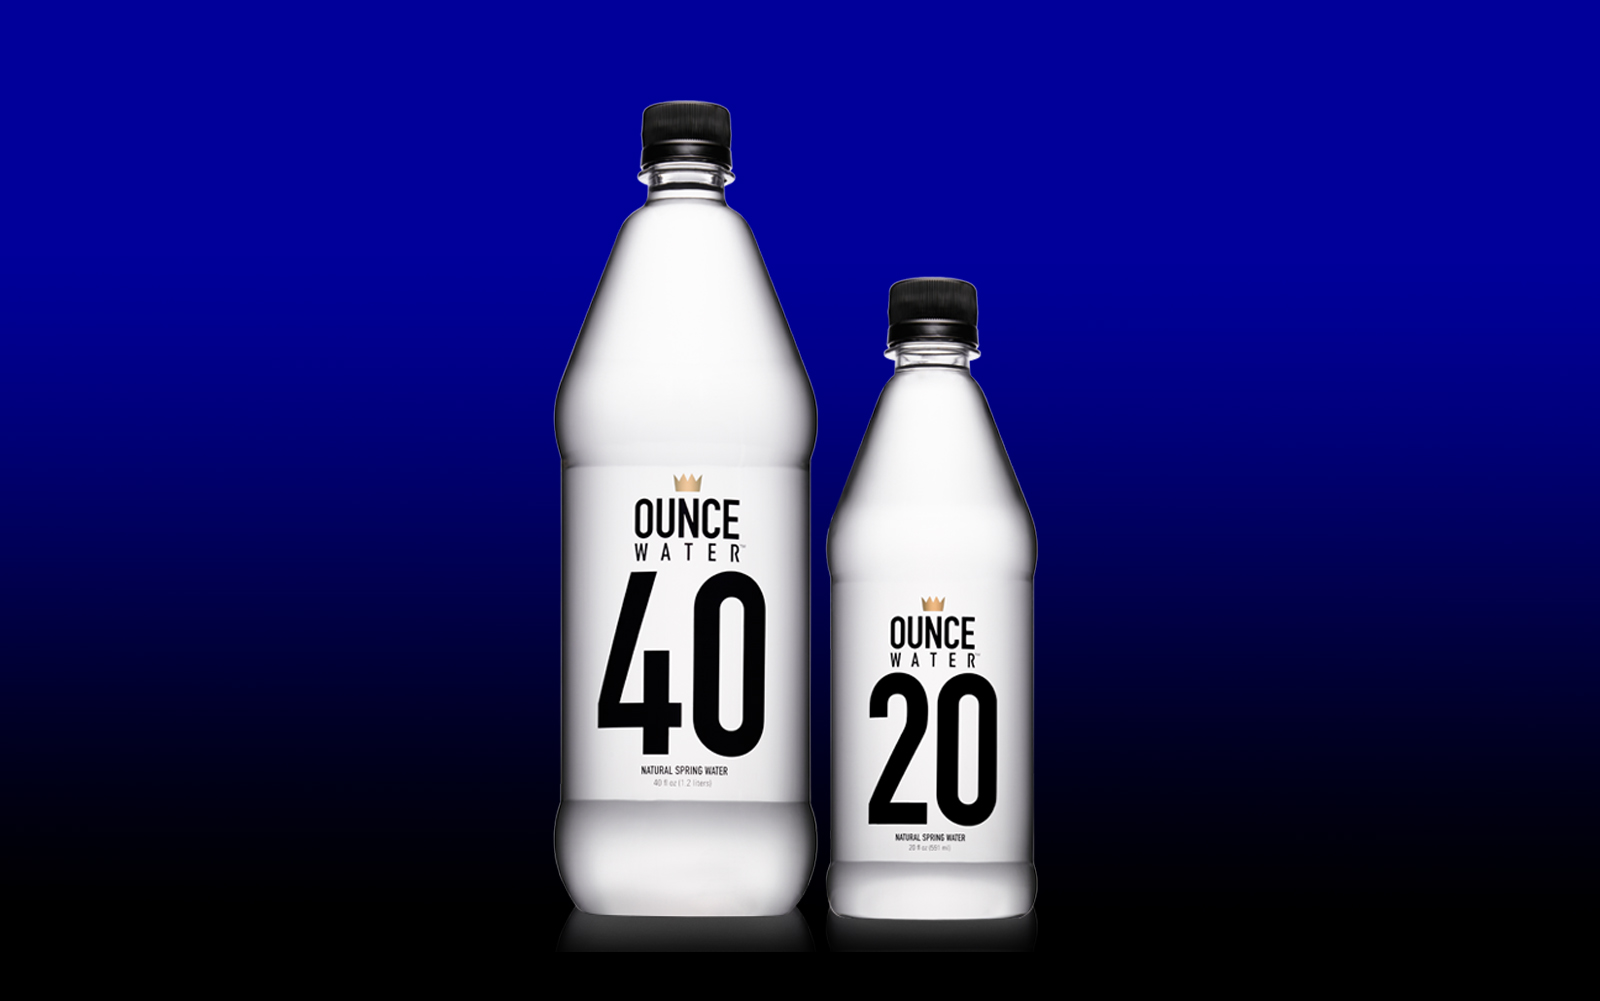 Brumate's Era 40 oz has changed my life! Now I can drink my water all